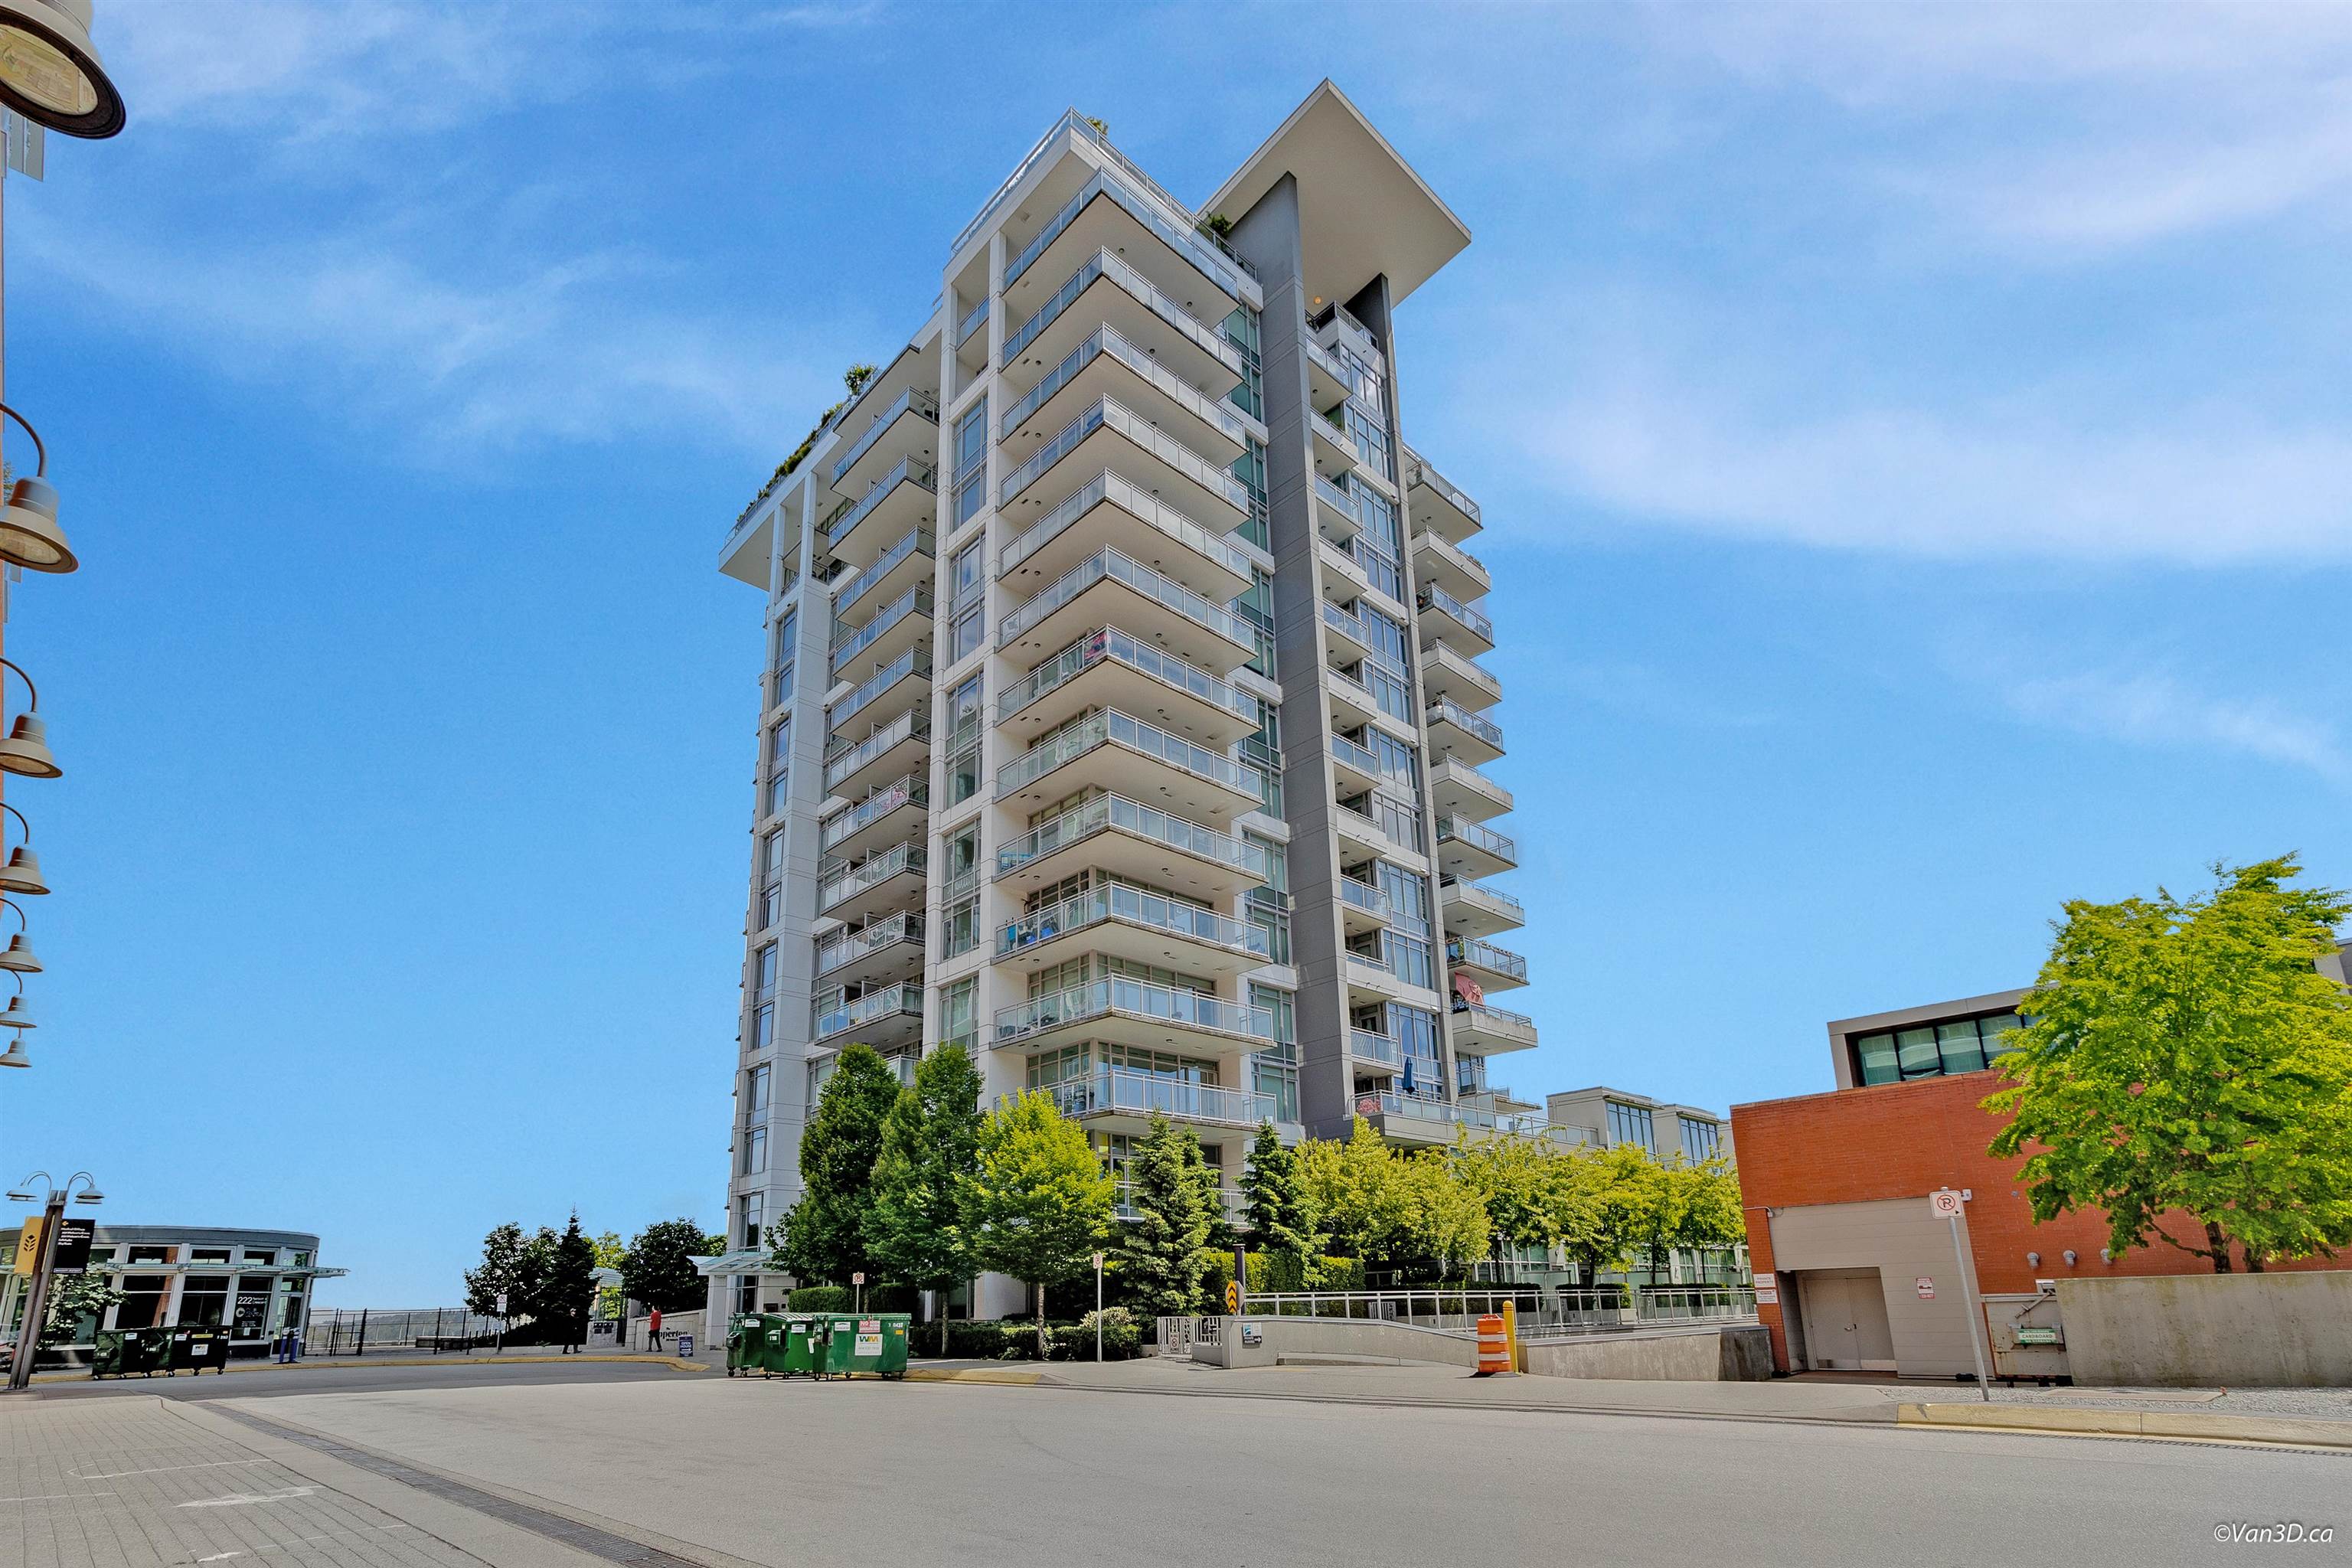 Listing image of 103 200 NELSON'S CRESCENT